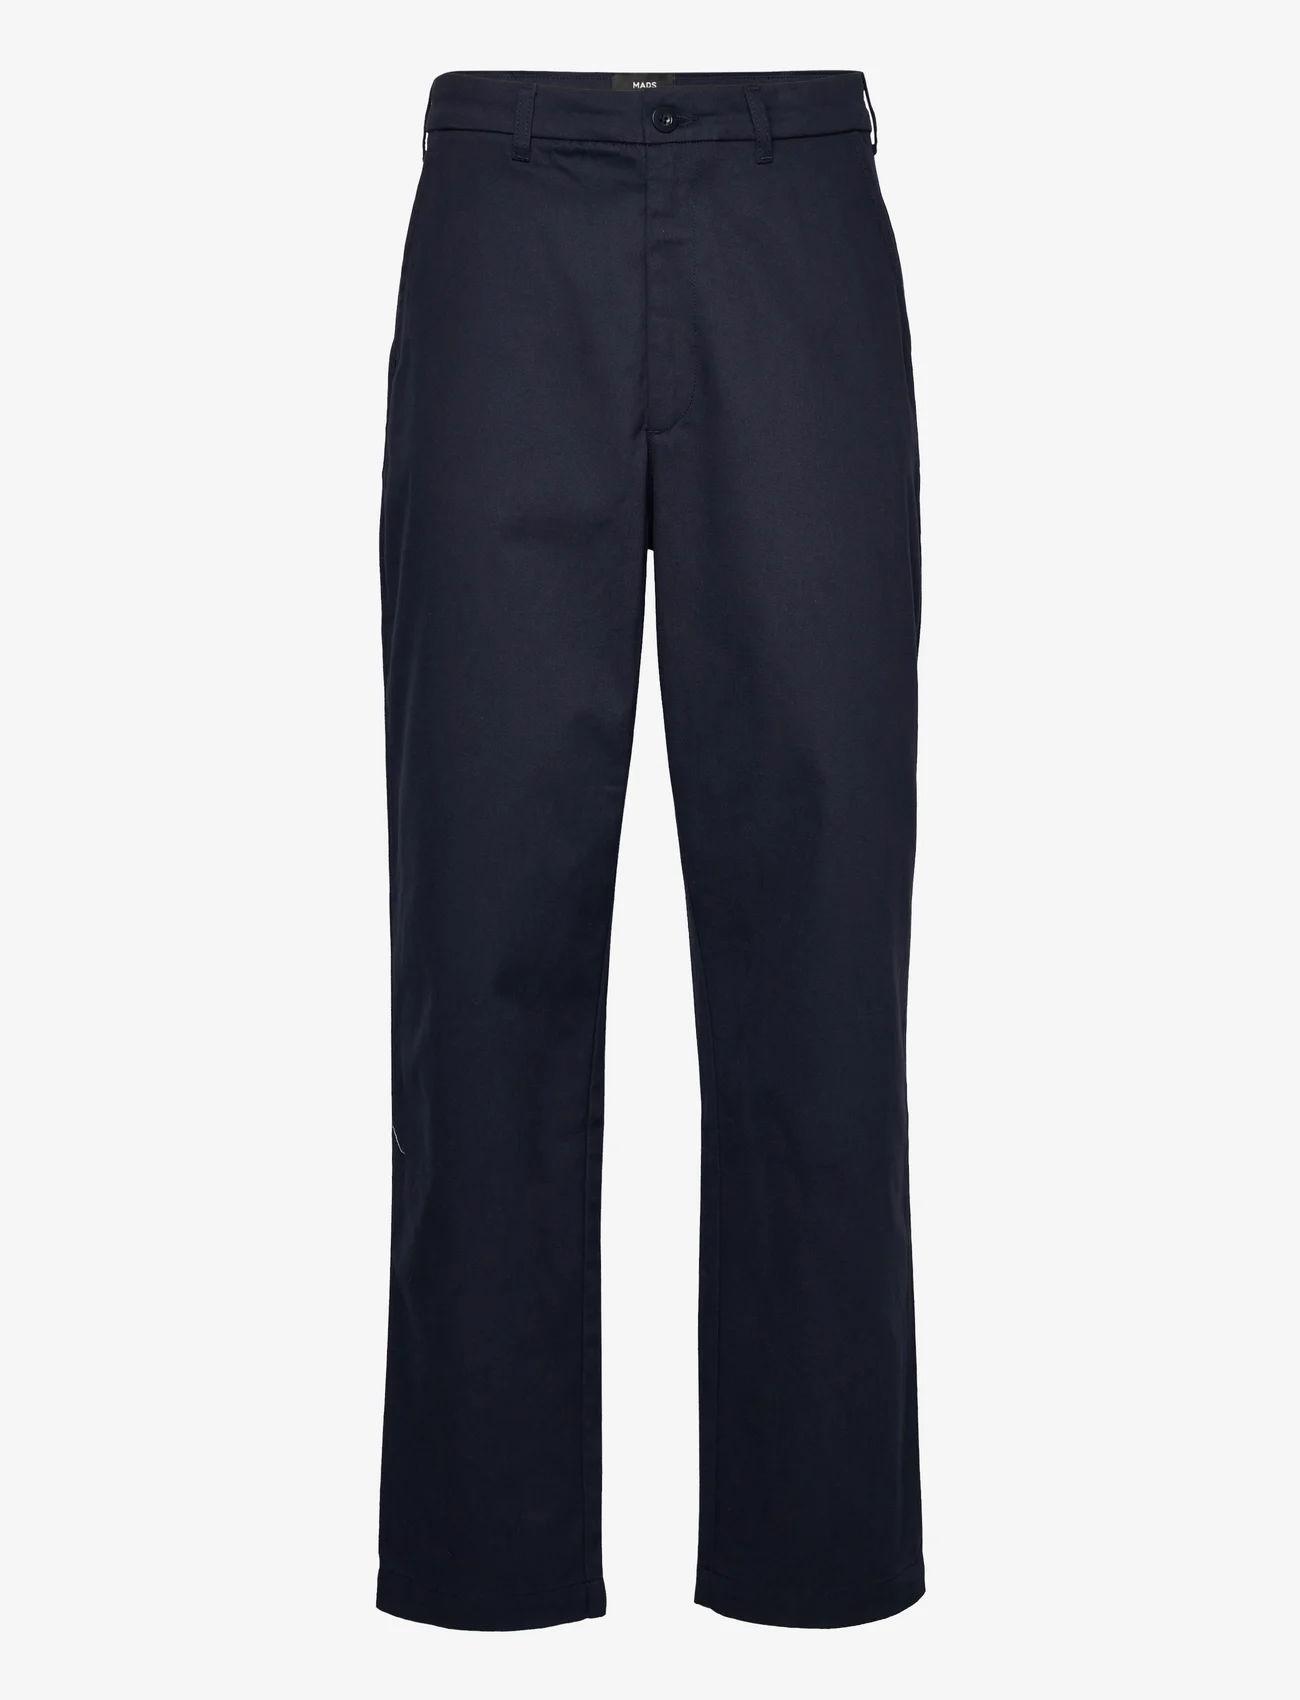 Mads Nørgaard - Crisp Twill Silas Pants - chinos - sky captain - 0